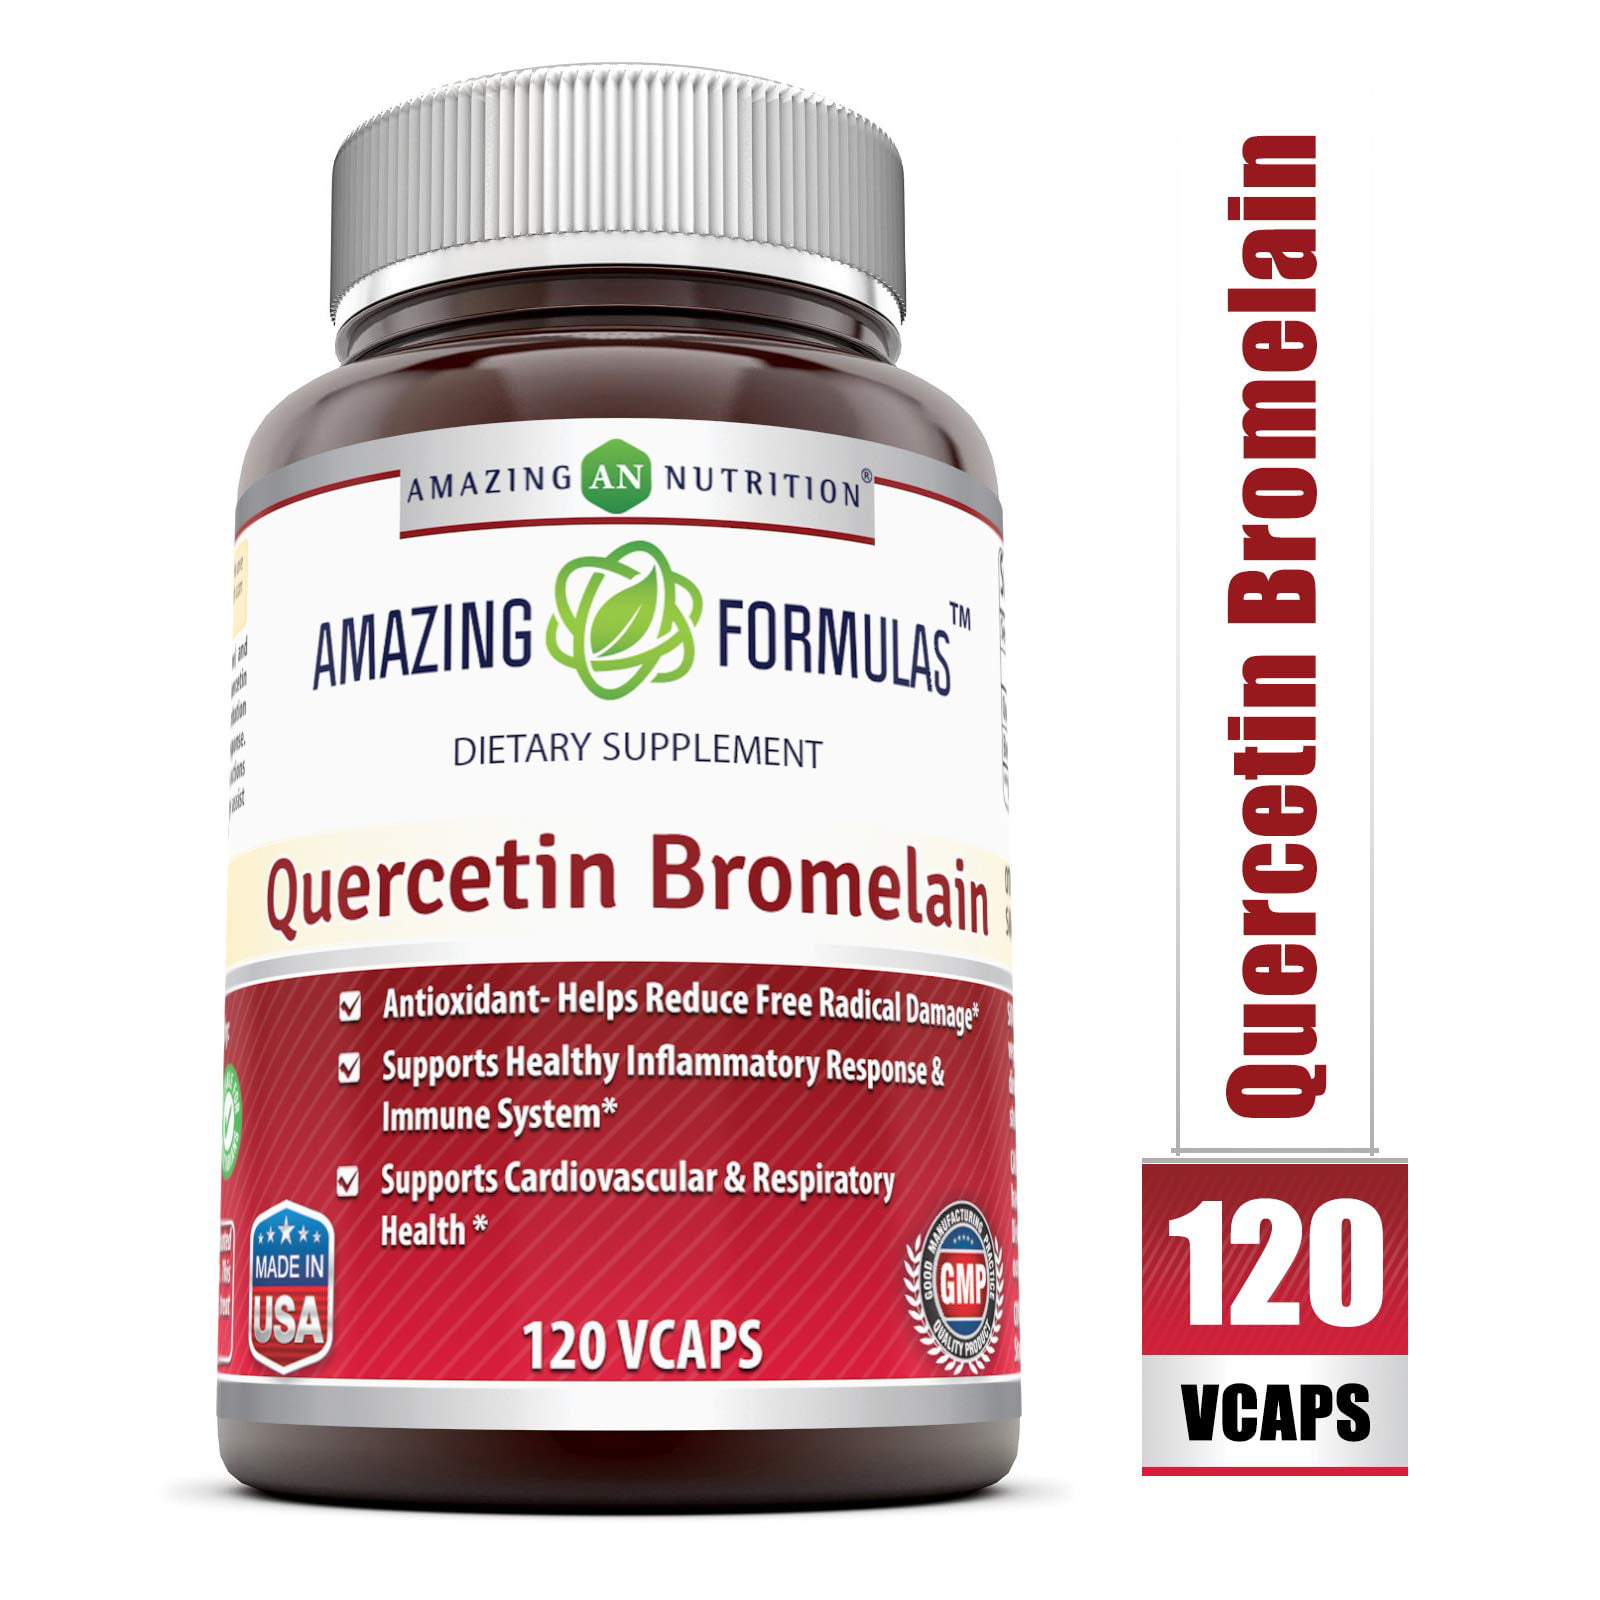 Amazing Nutrition - Quercetin 800 Mg with Bromelain 165 Mg, 120 Vcaps ...